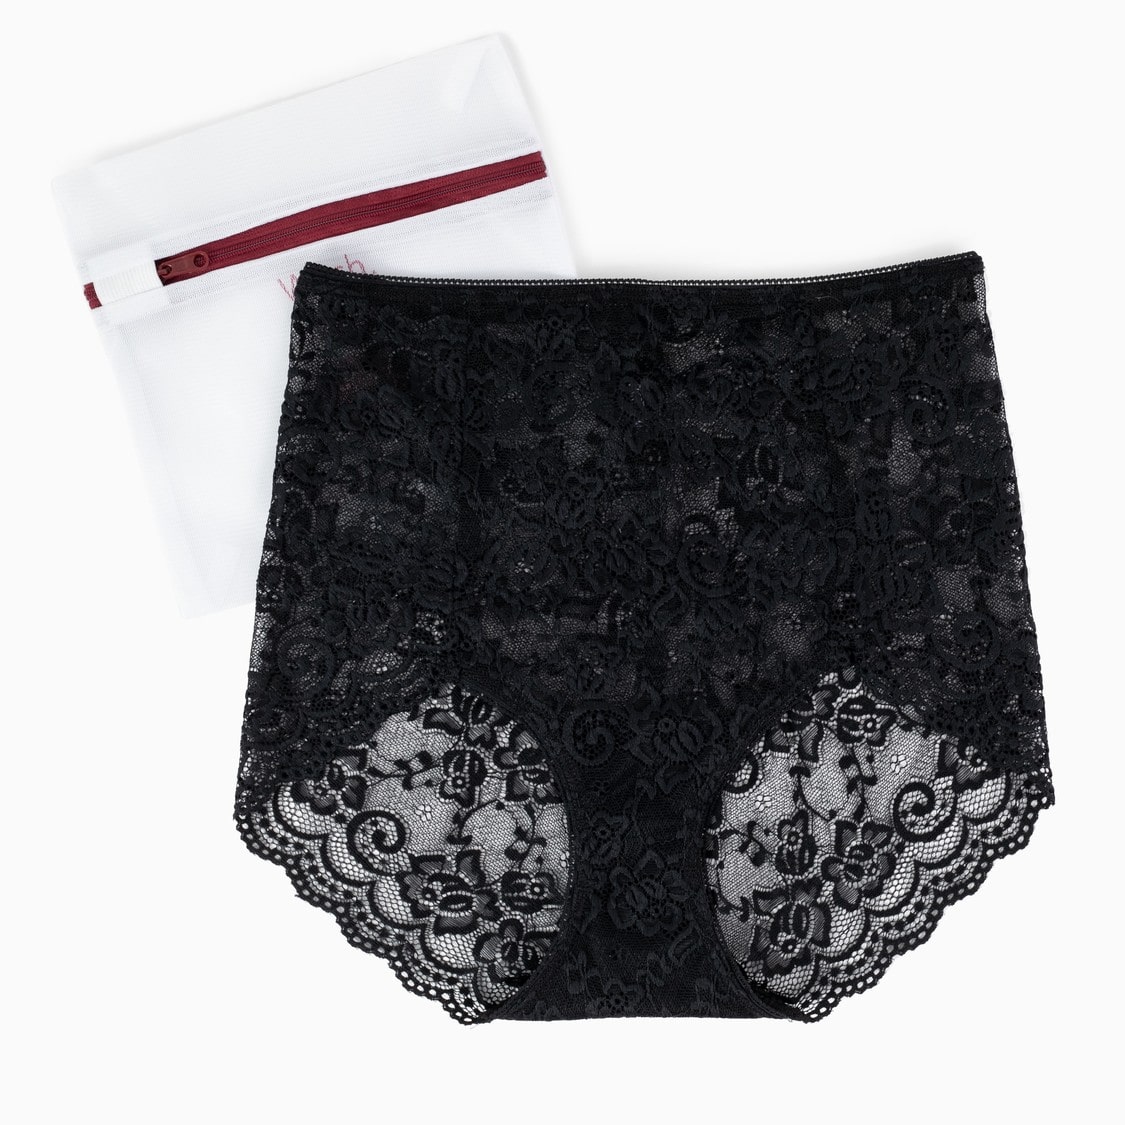 Her Highness Lace Brief in Onyx